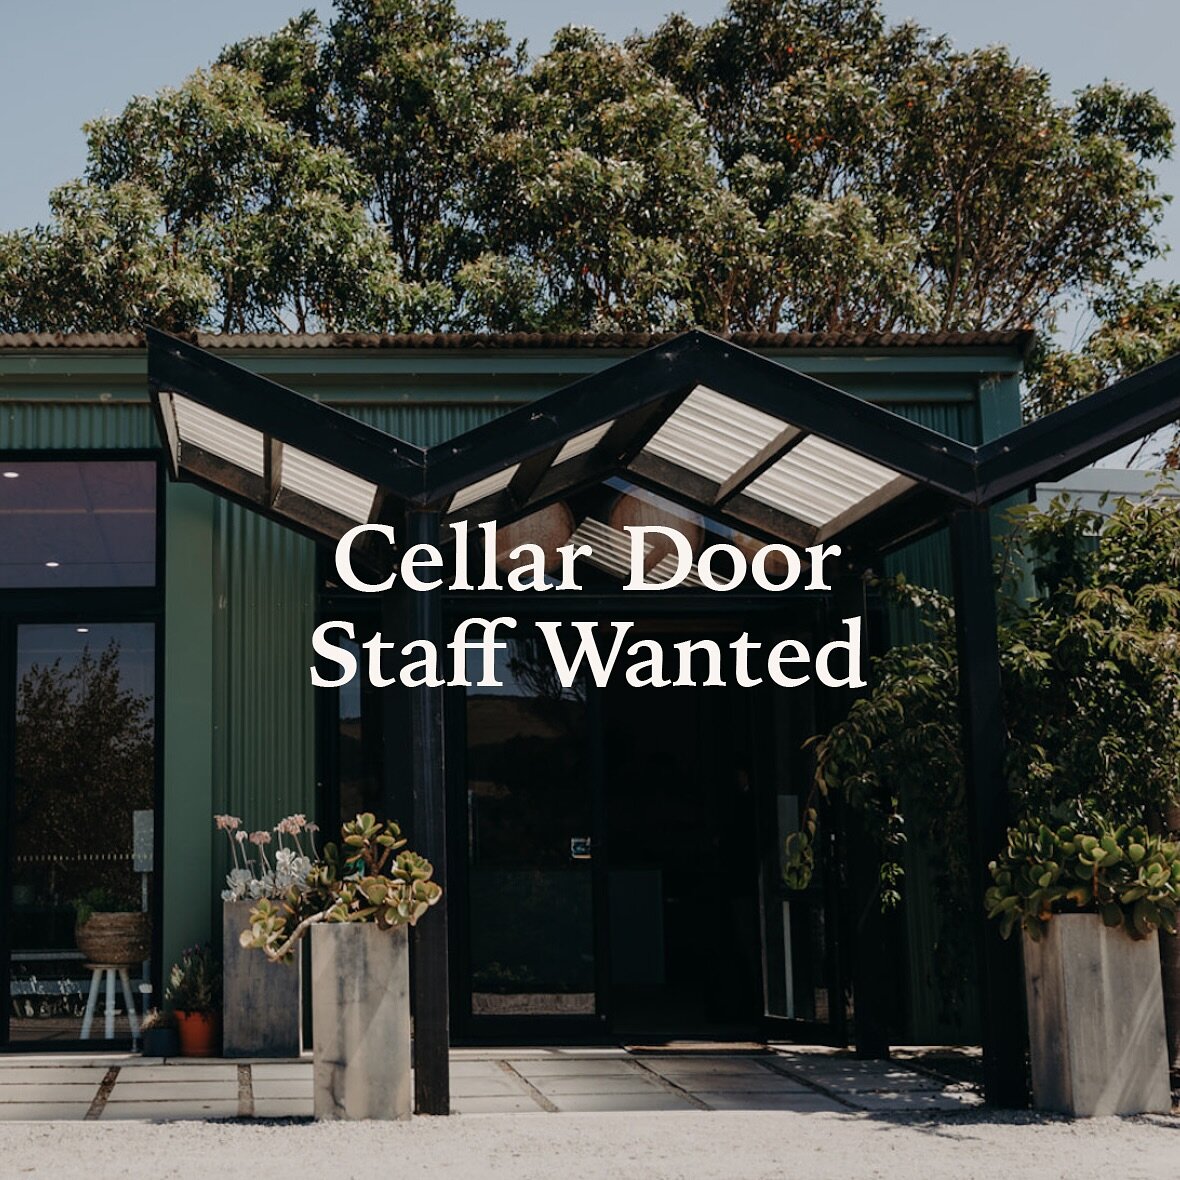 Join our vineyard crew: ✨🍇 Casual Cellar Door Staff Wanted 🍇✨ 

A great opportunity to work at a winery in the heart of South Gippsland. 🍃

What we&rsquo;re looking for: 
✔️ Great customer service and retail/hospo skills. 
✔️ Passion for loc